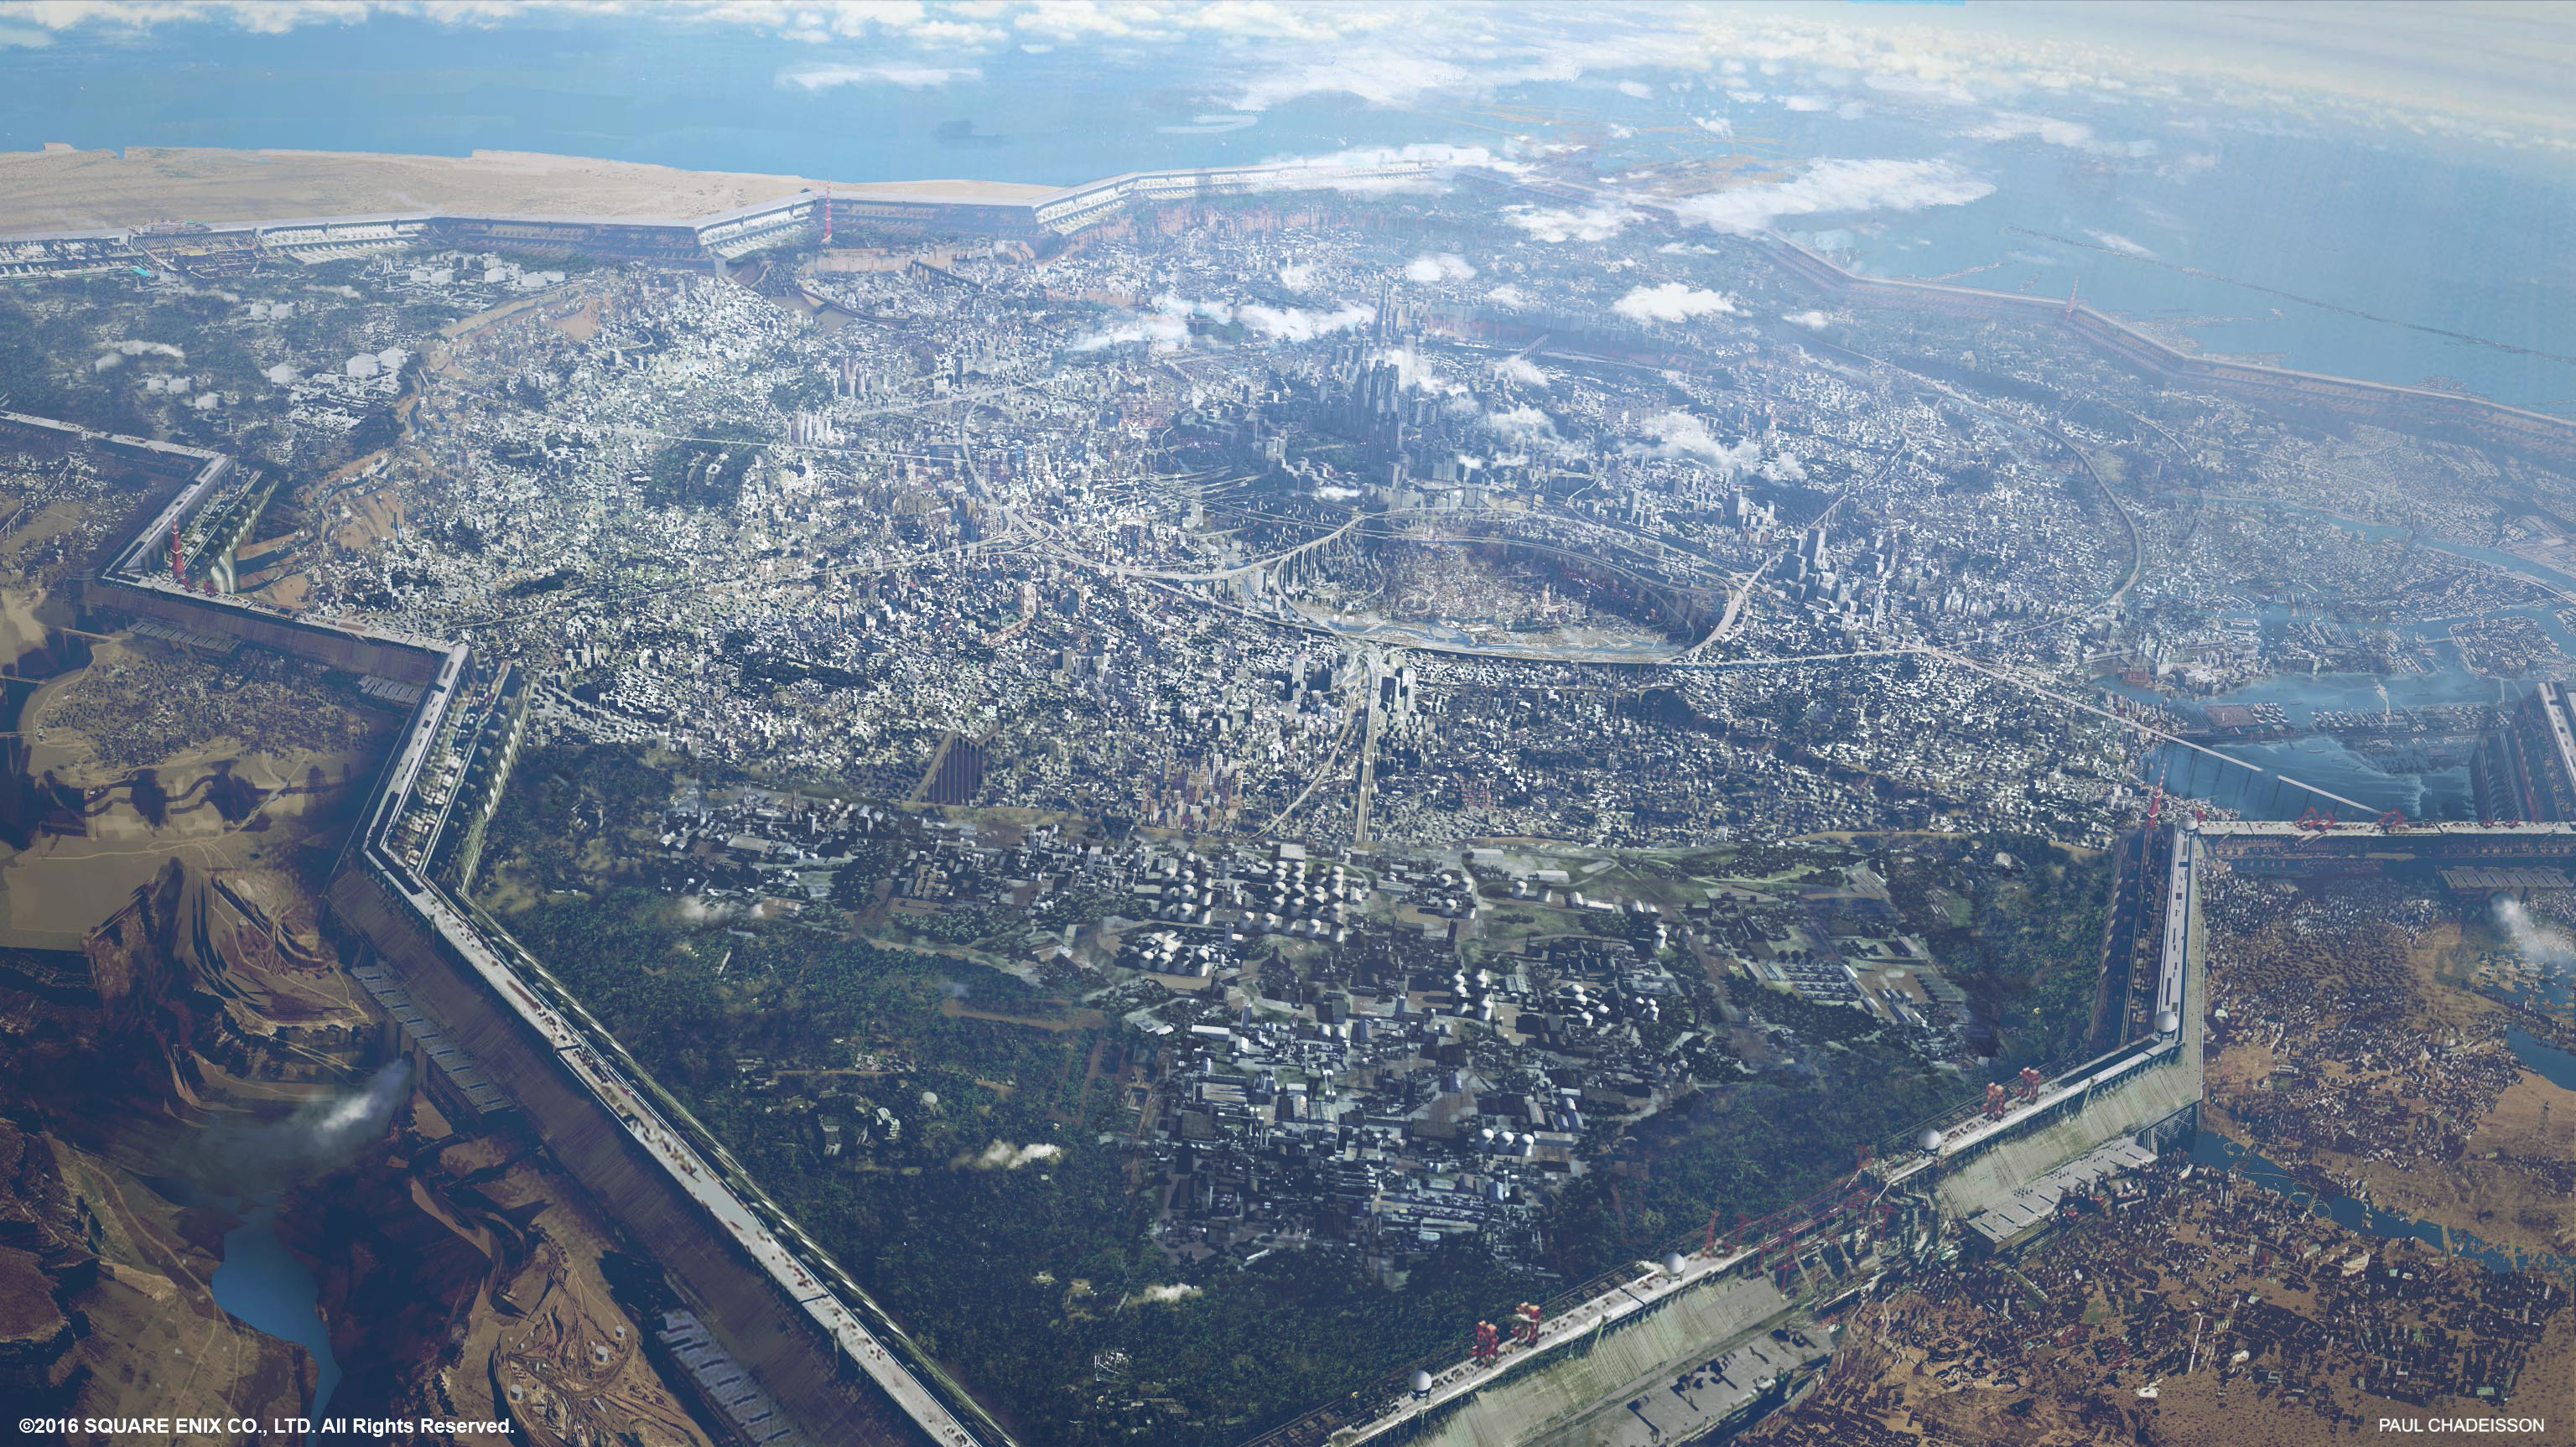 General 3072x1726 Paul Chadeisson aerial view city wall futuristic city desert river lake highway urban Final Fantasy Final Fantasy XV insomnia city Kingsglaive: Final Fantasy XV video games concept art skyscraper building forest clouds atmosphere matte painting sea canyon mountain chain construction construction site photoshopped radio tower silo digital painting Square Enix Kingdom of Lucis solar panel solar power bridge detailed details watermarked